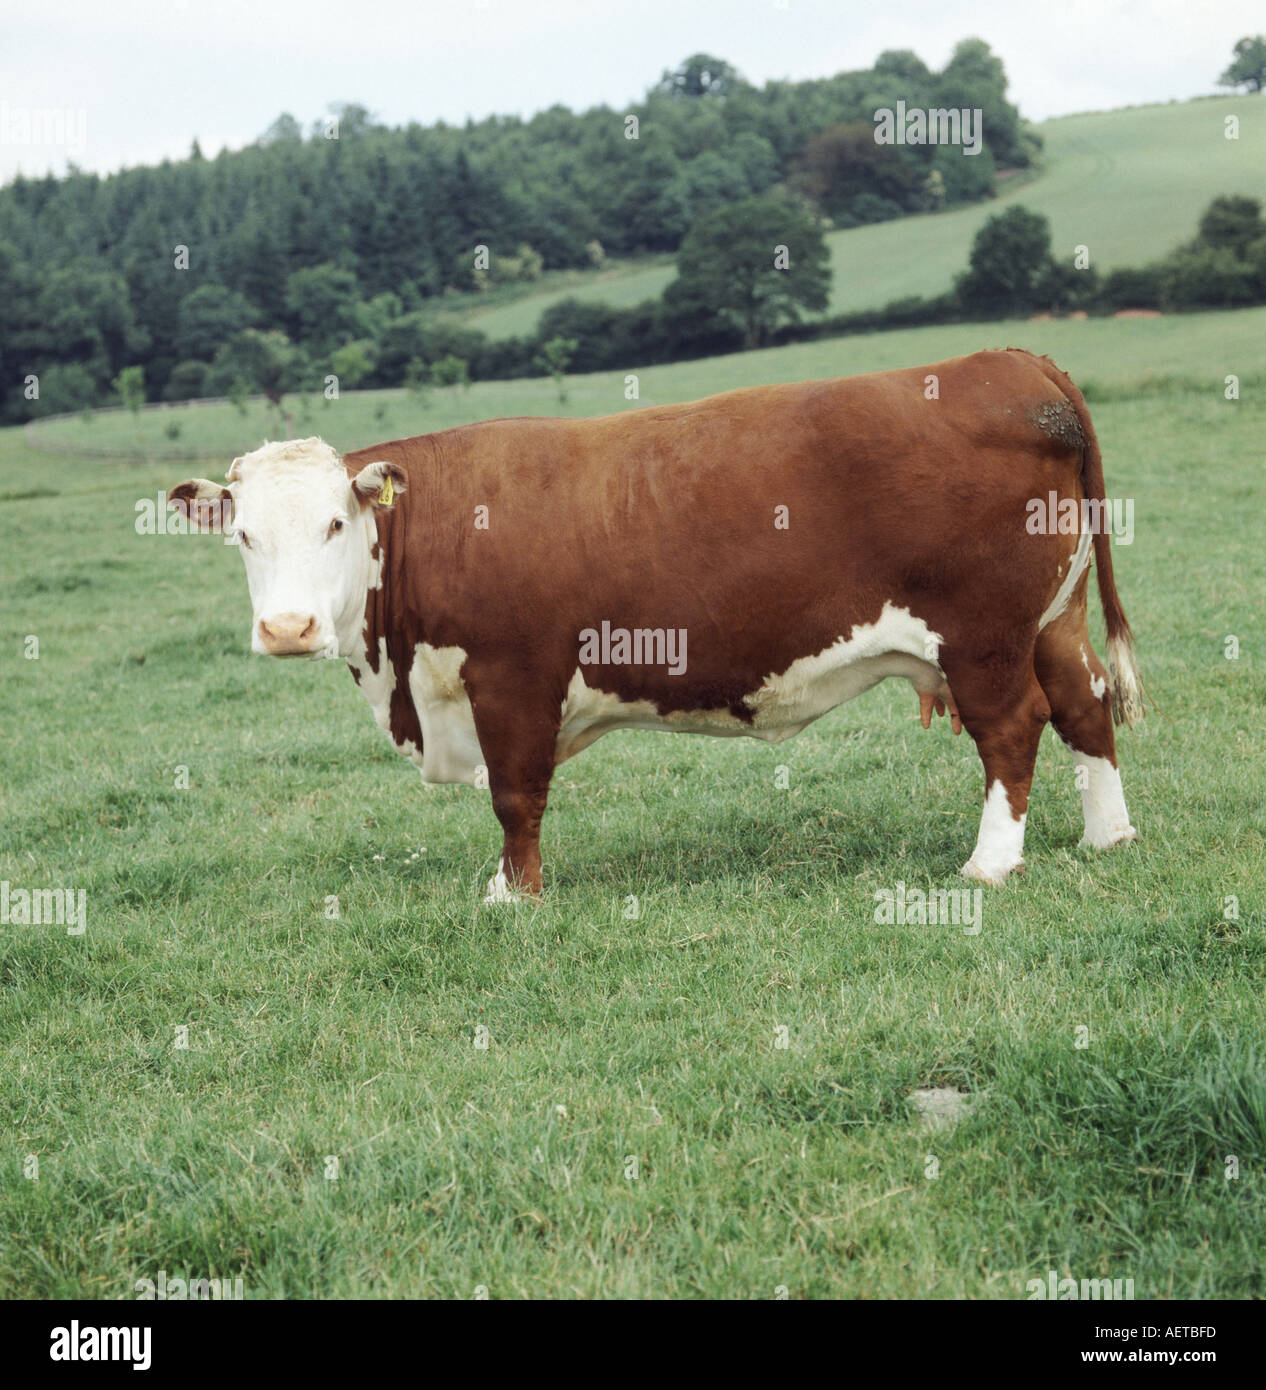 Hereford beef cow on pasture in Hereford countryside UK Stock Photo